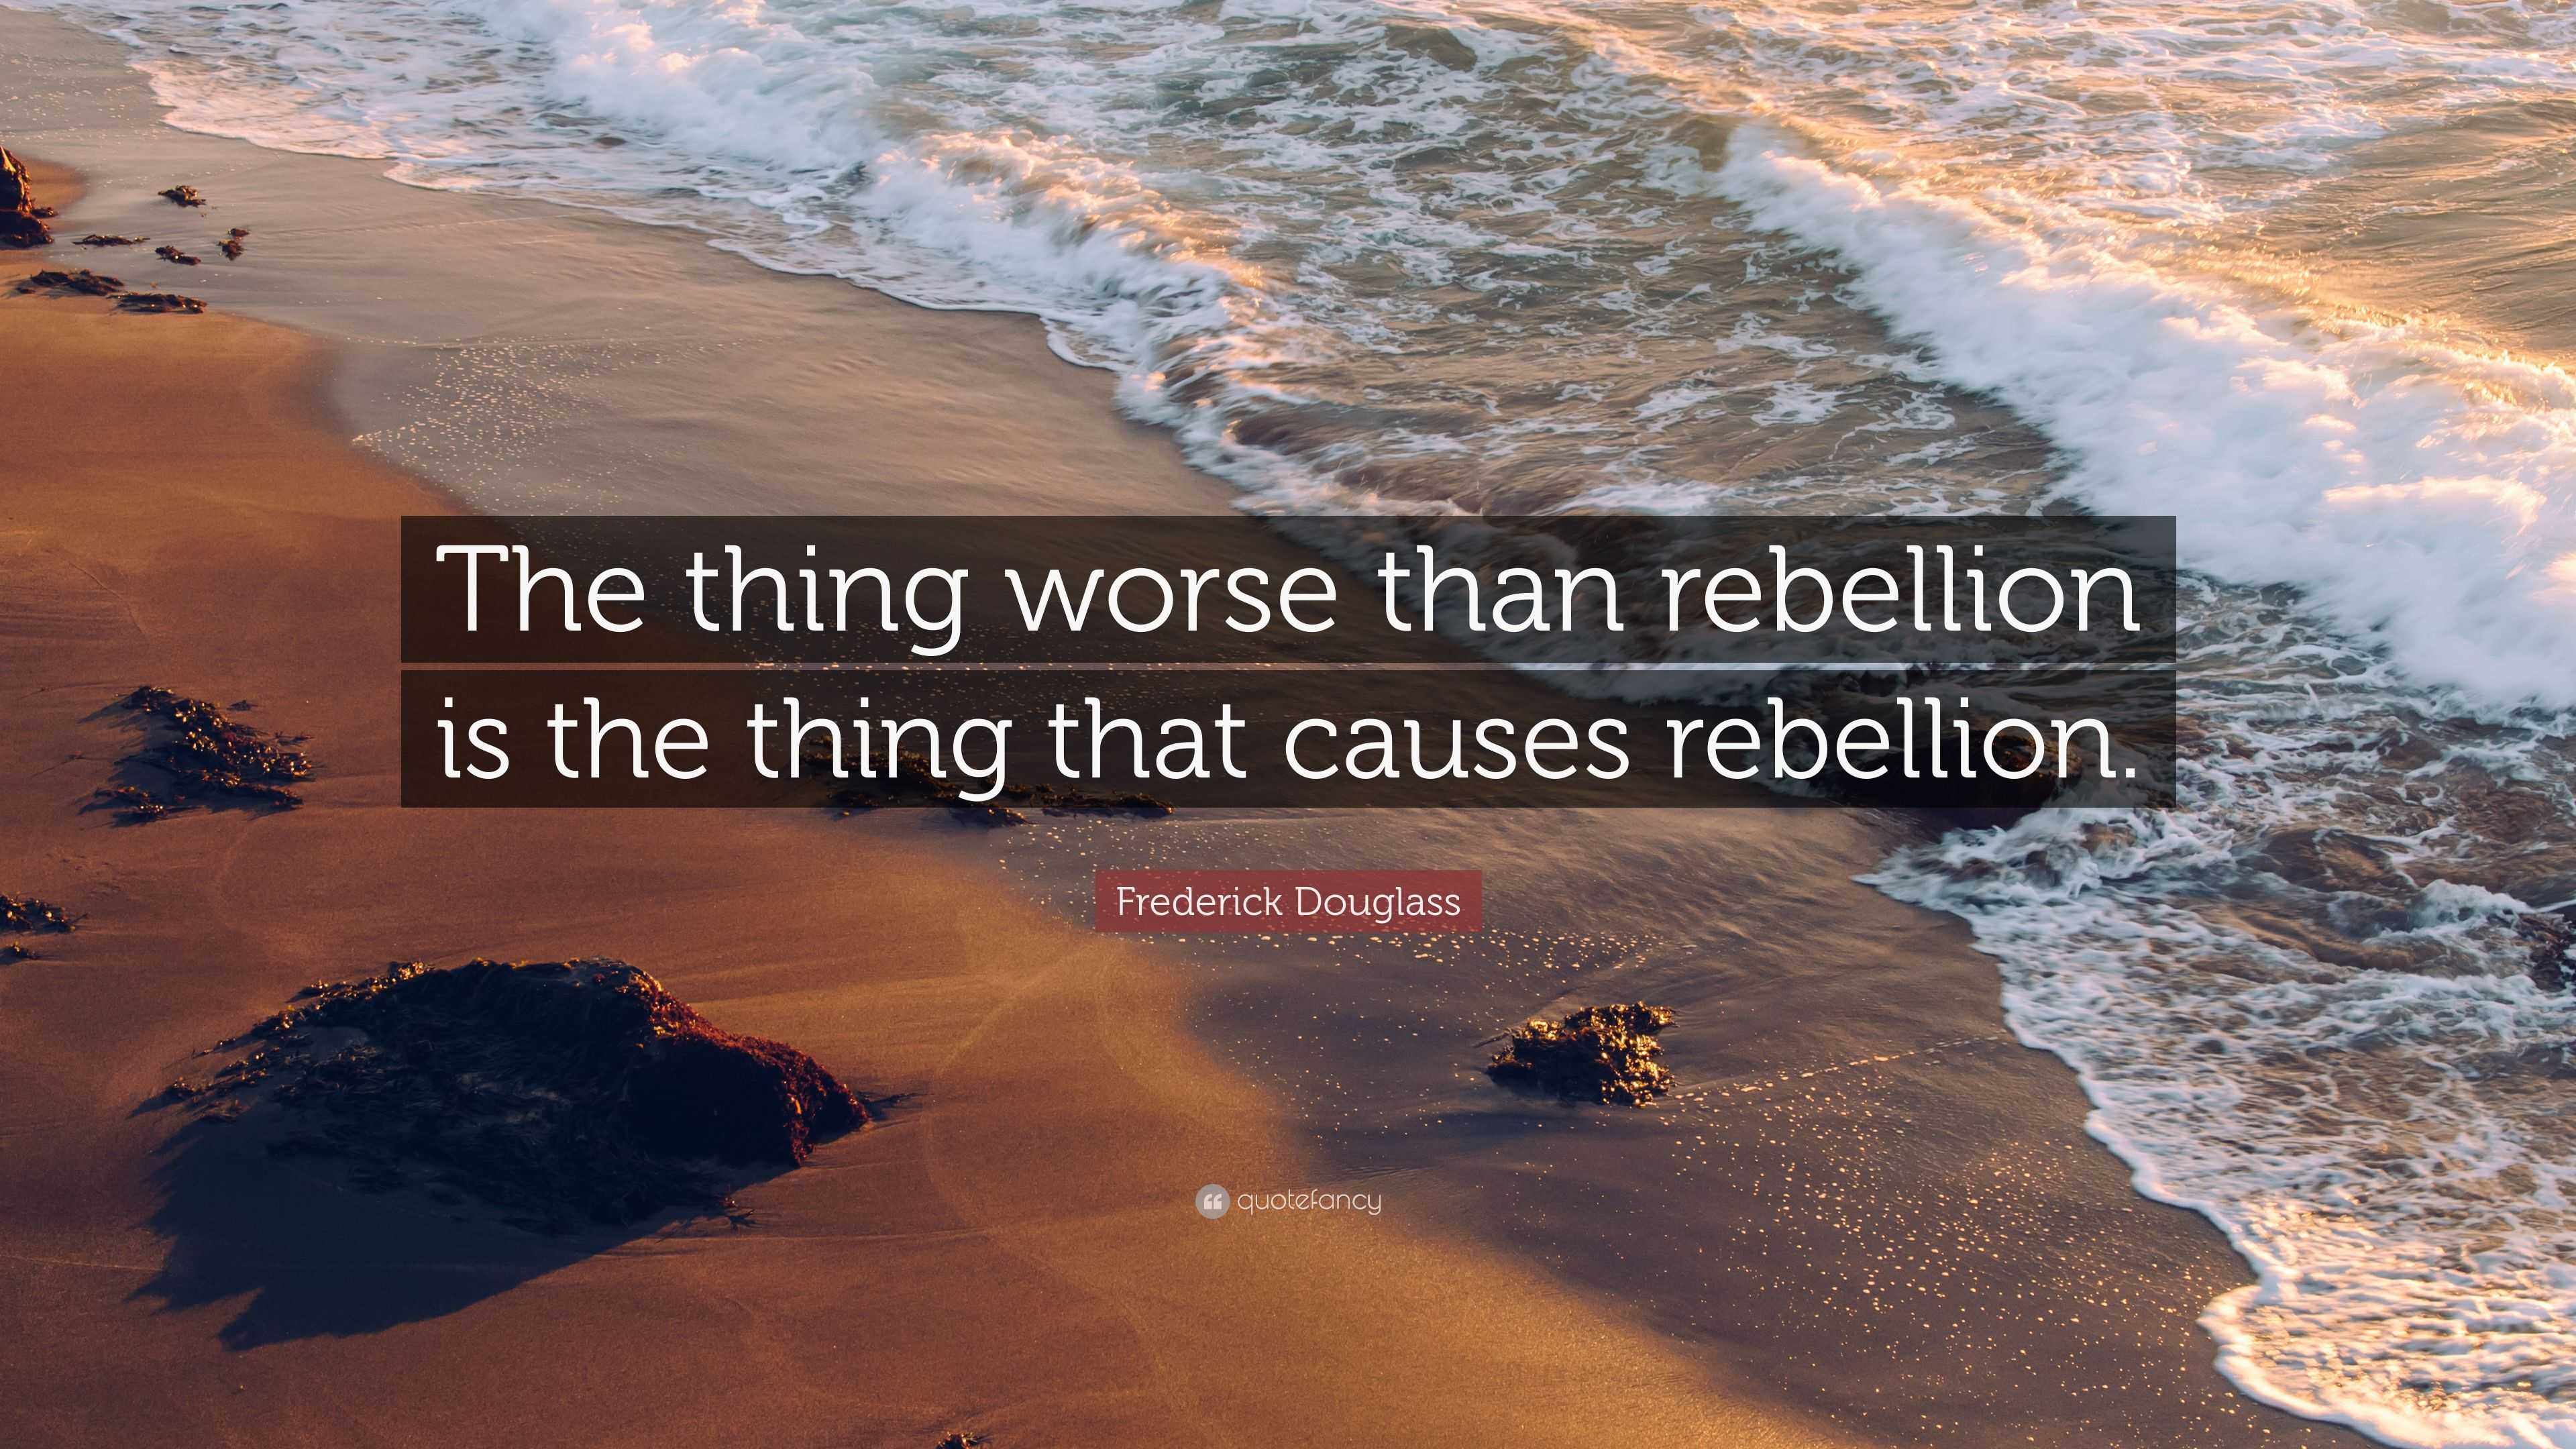 Frederick Douglass Quote “The thing worse than rebellion is the thing